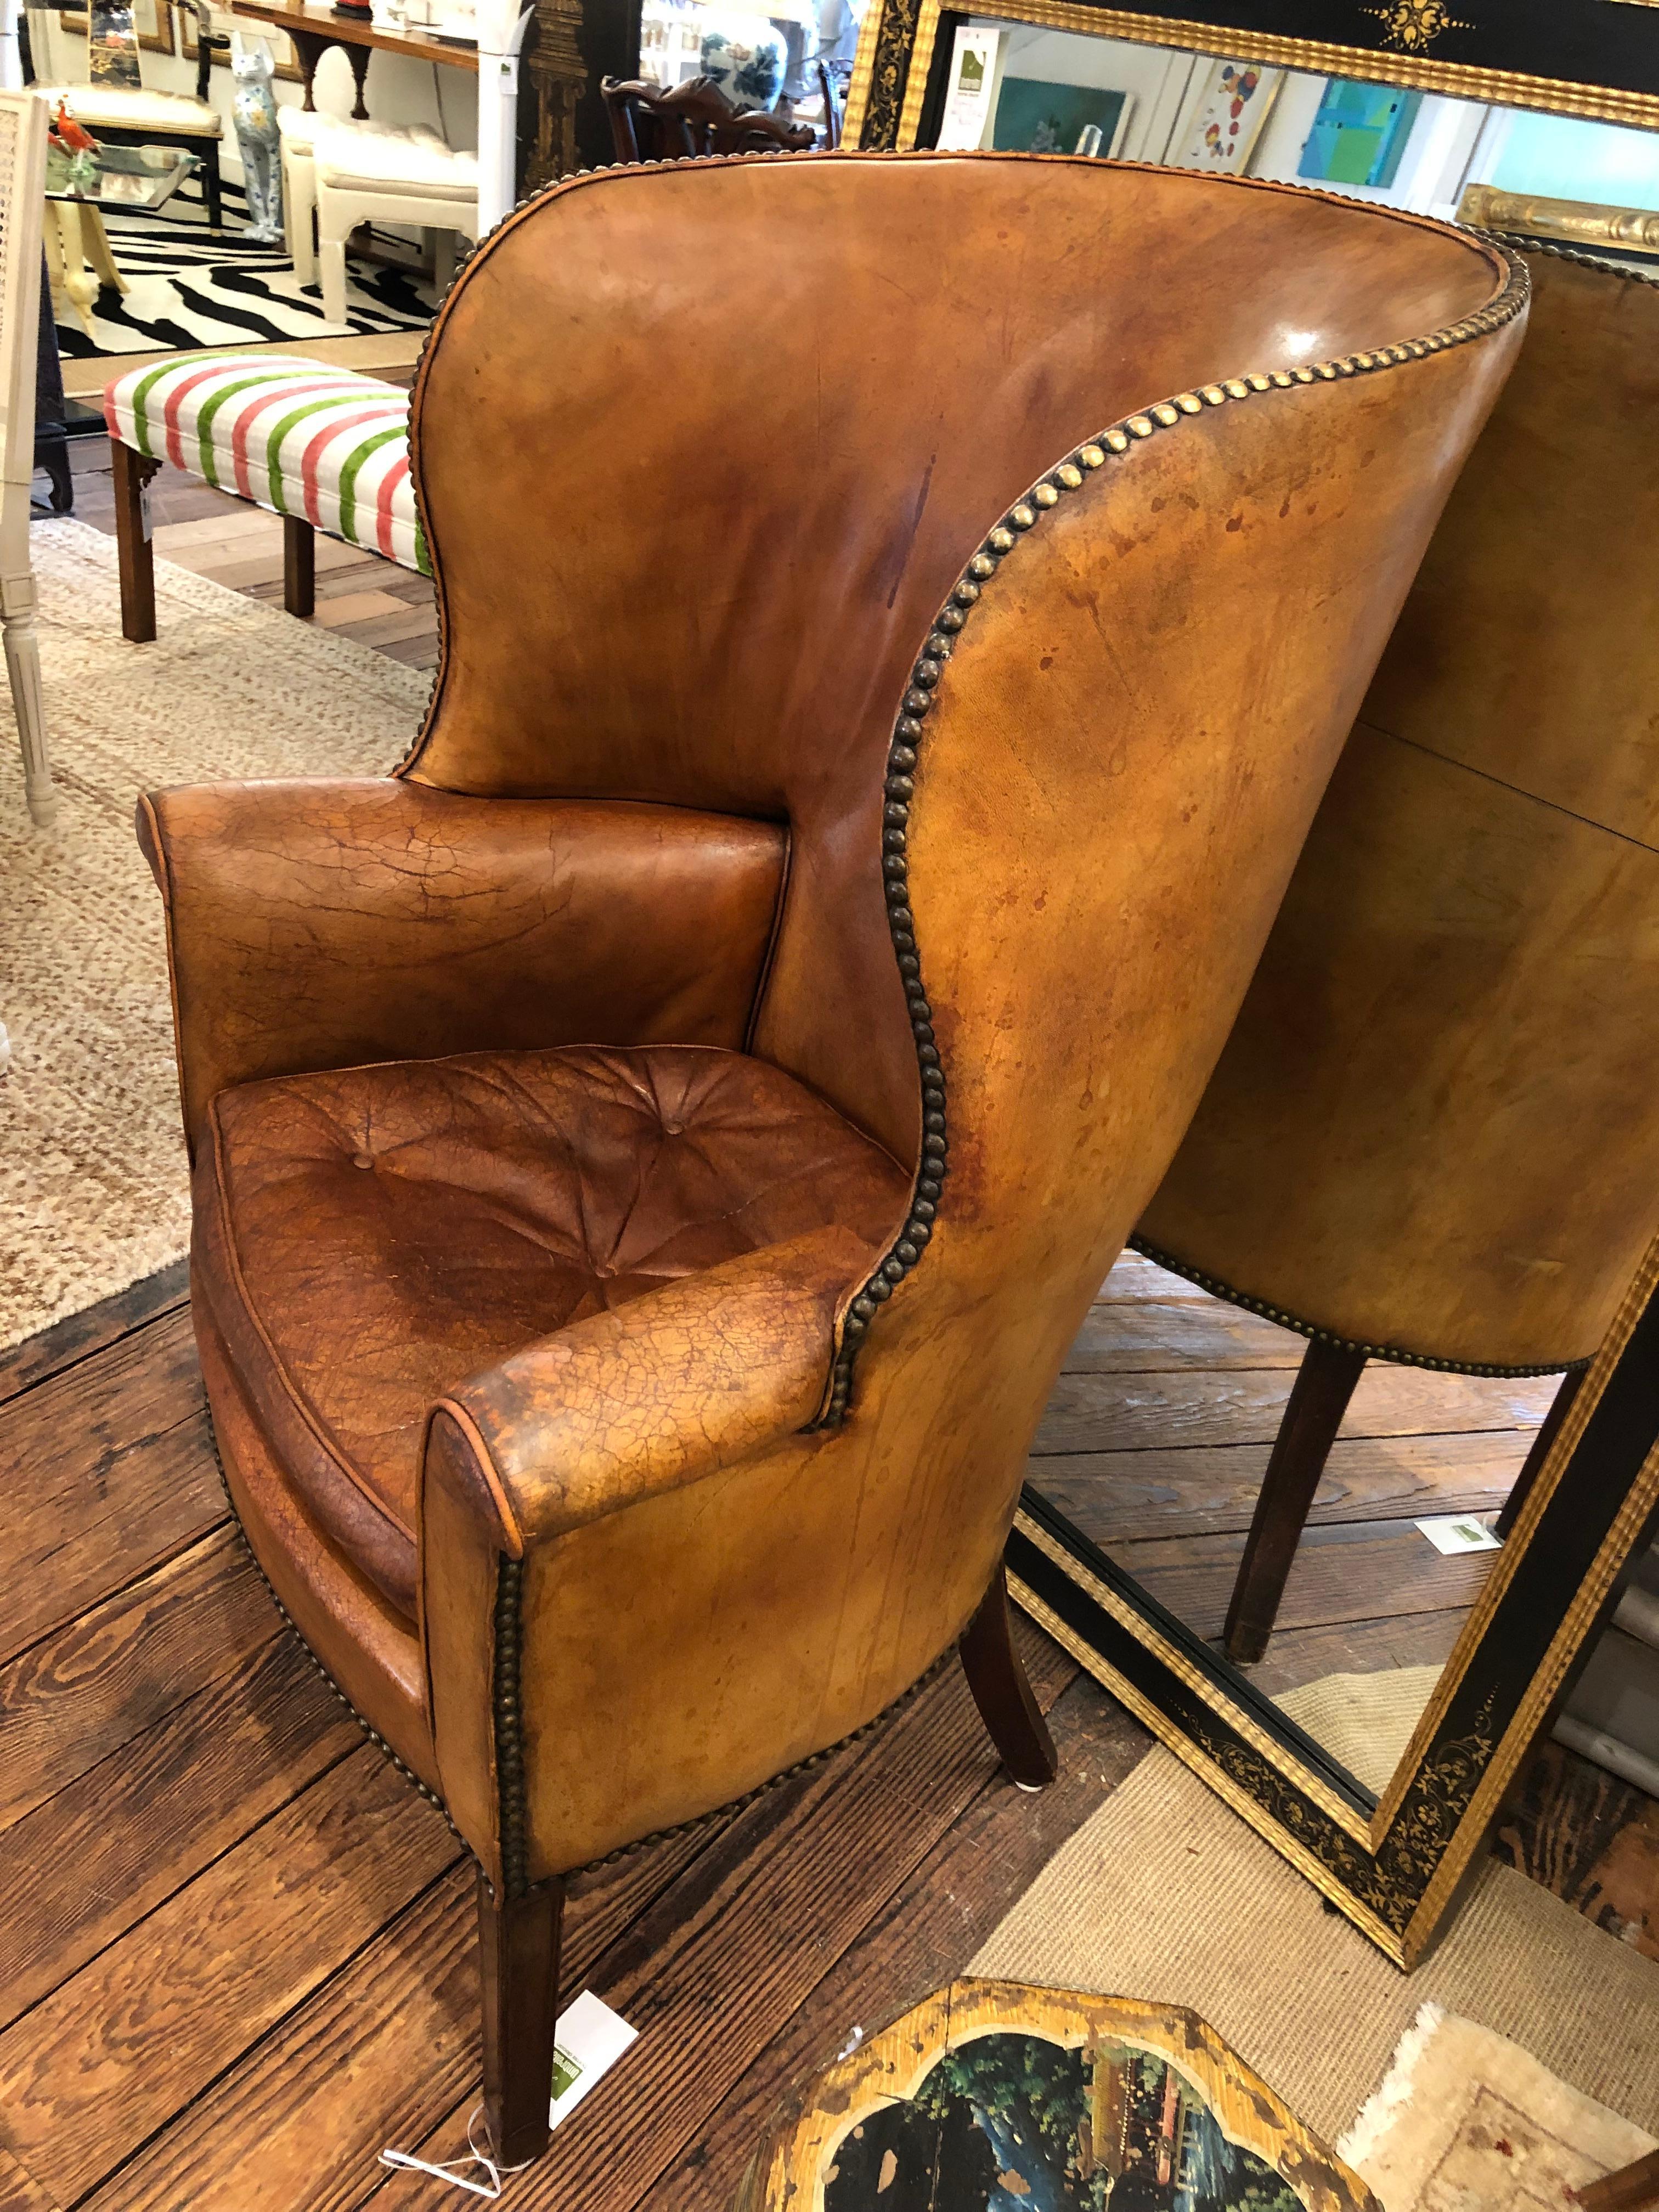 Authentically distressed yummy caramel leather barrel back wing chair having tufted seat cushion and aged brass nailhead details.  They don't come along like this very often.
27 w at top
arm height 27.5
s/h 19.5
s/d 20

Ronda S